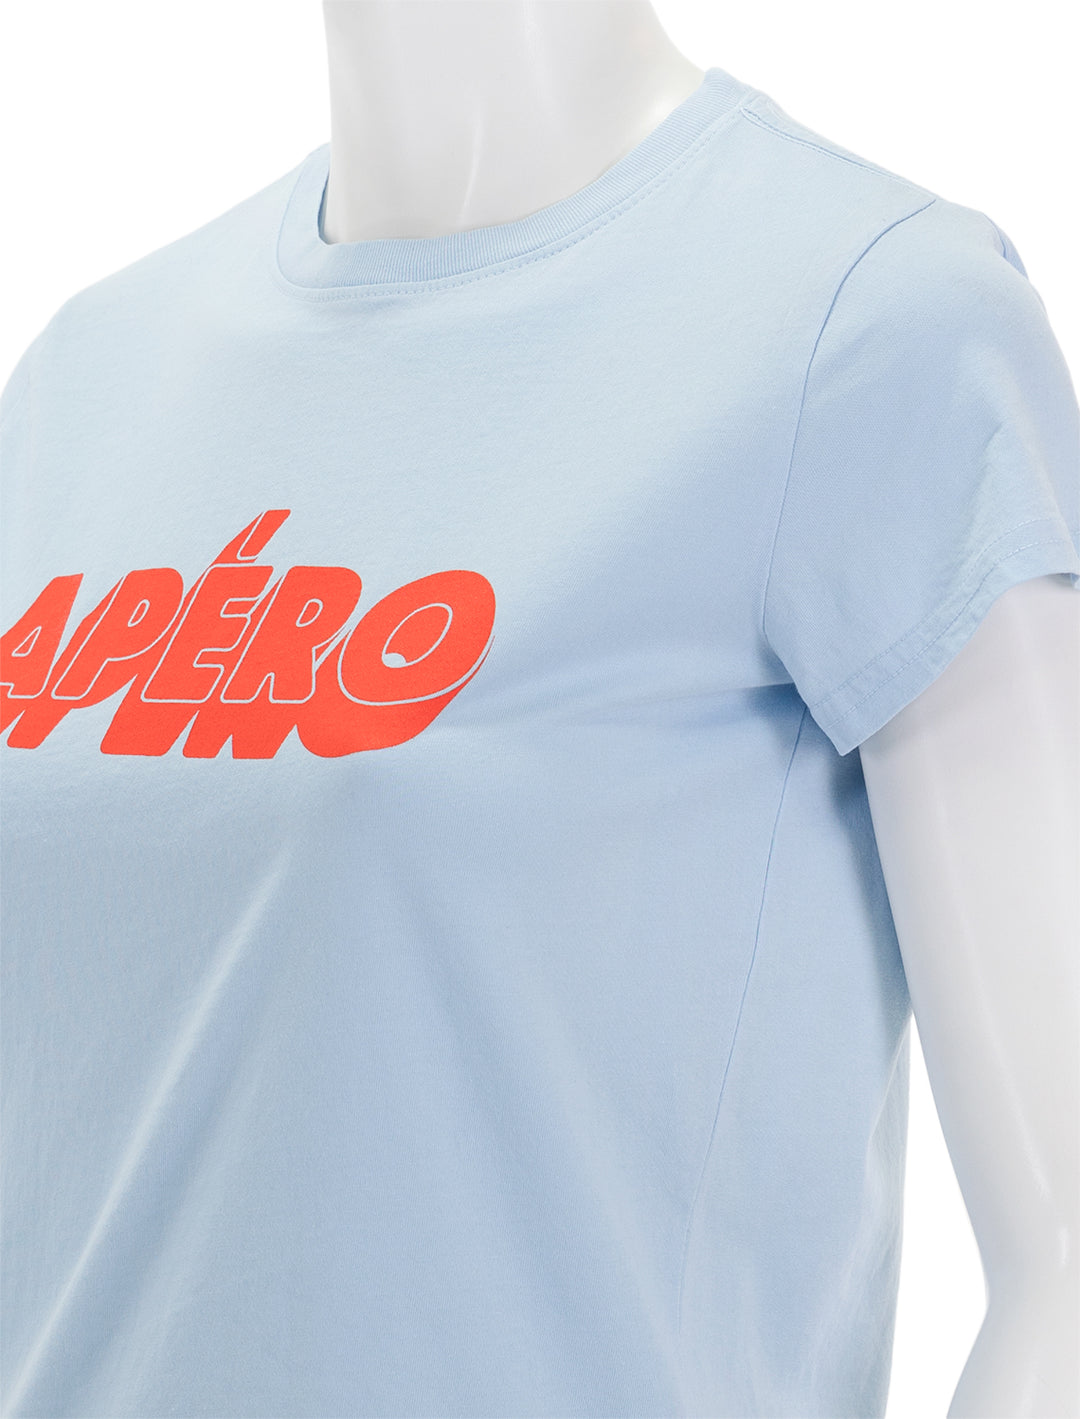 Close-up view of Clare V.'s apero light blue classic tee.